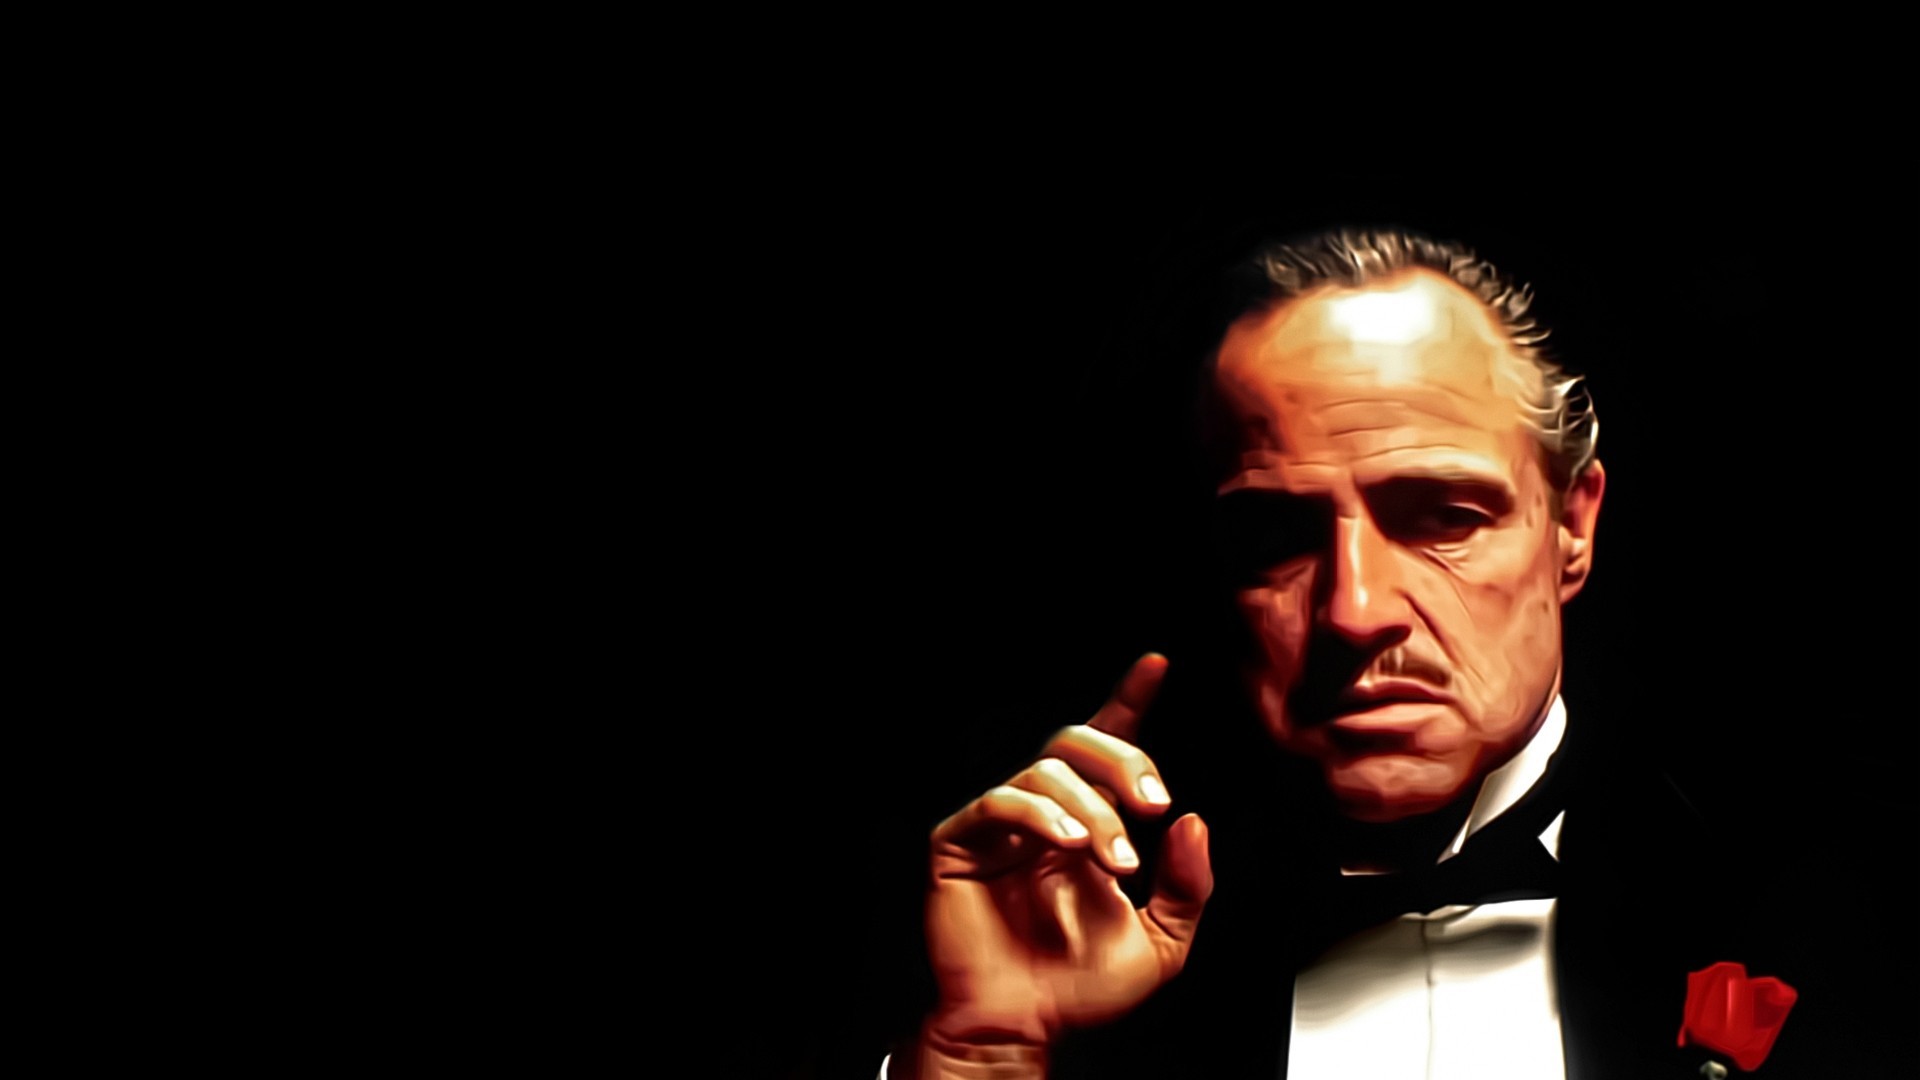 1920x1080 Don Vito Corleone | Godfather | pictures and wallpaper for desktop